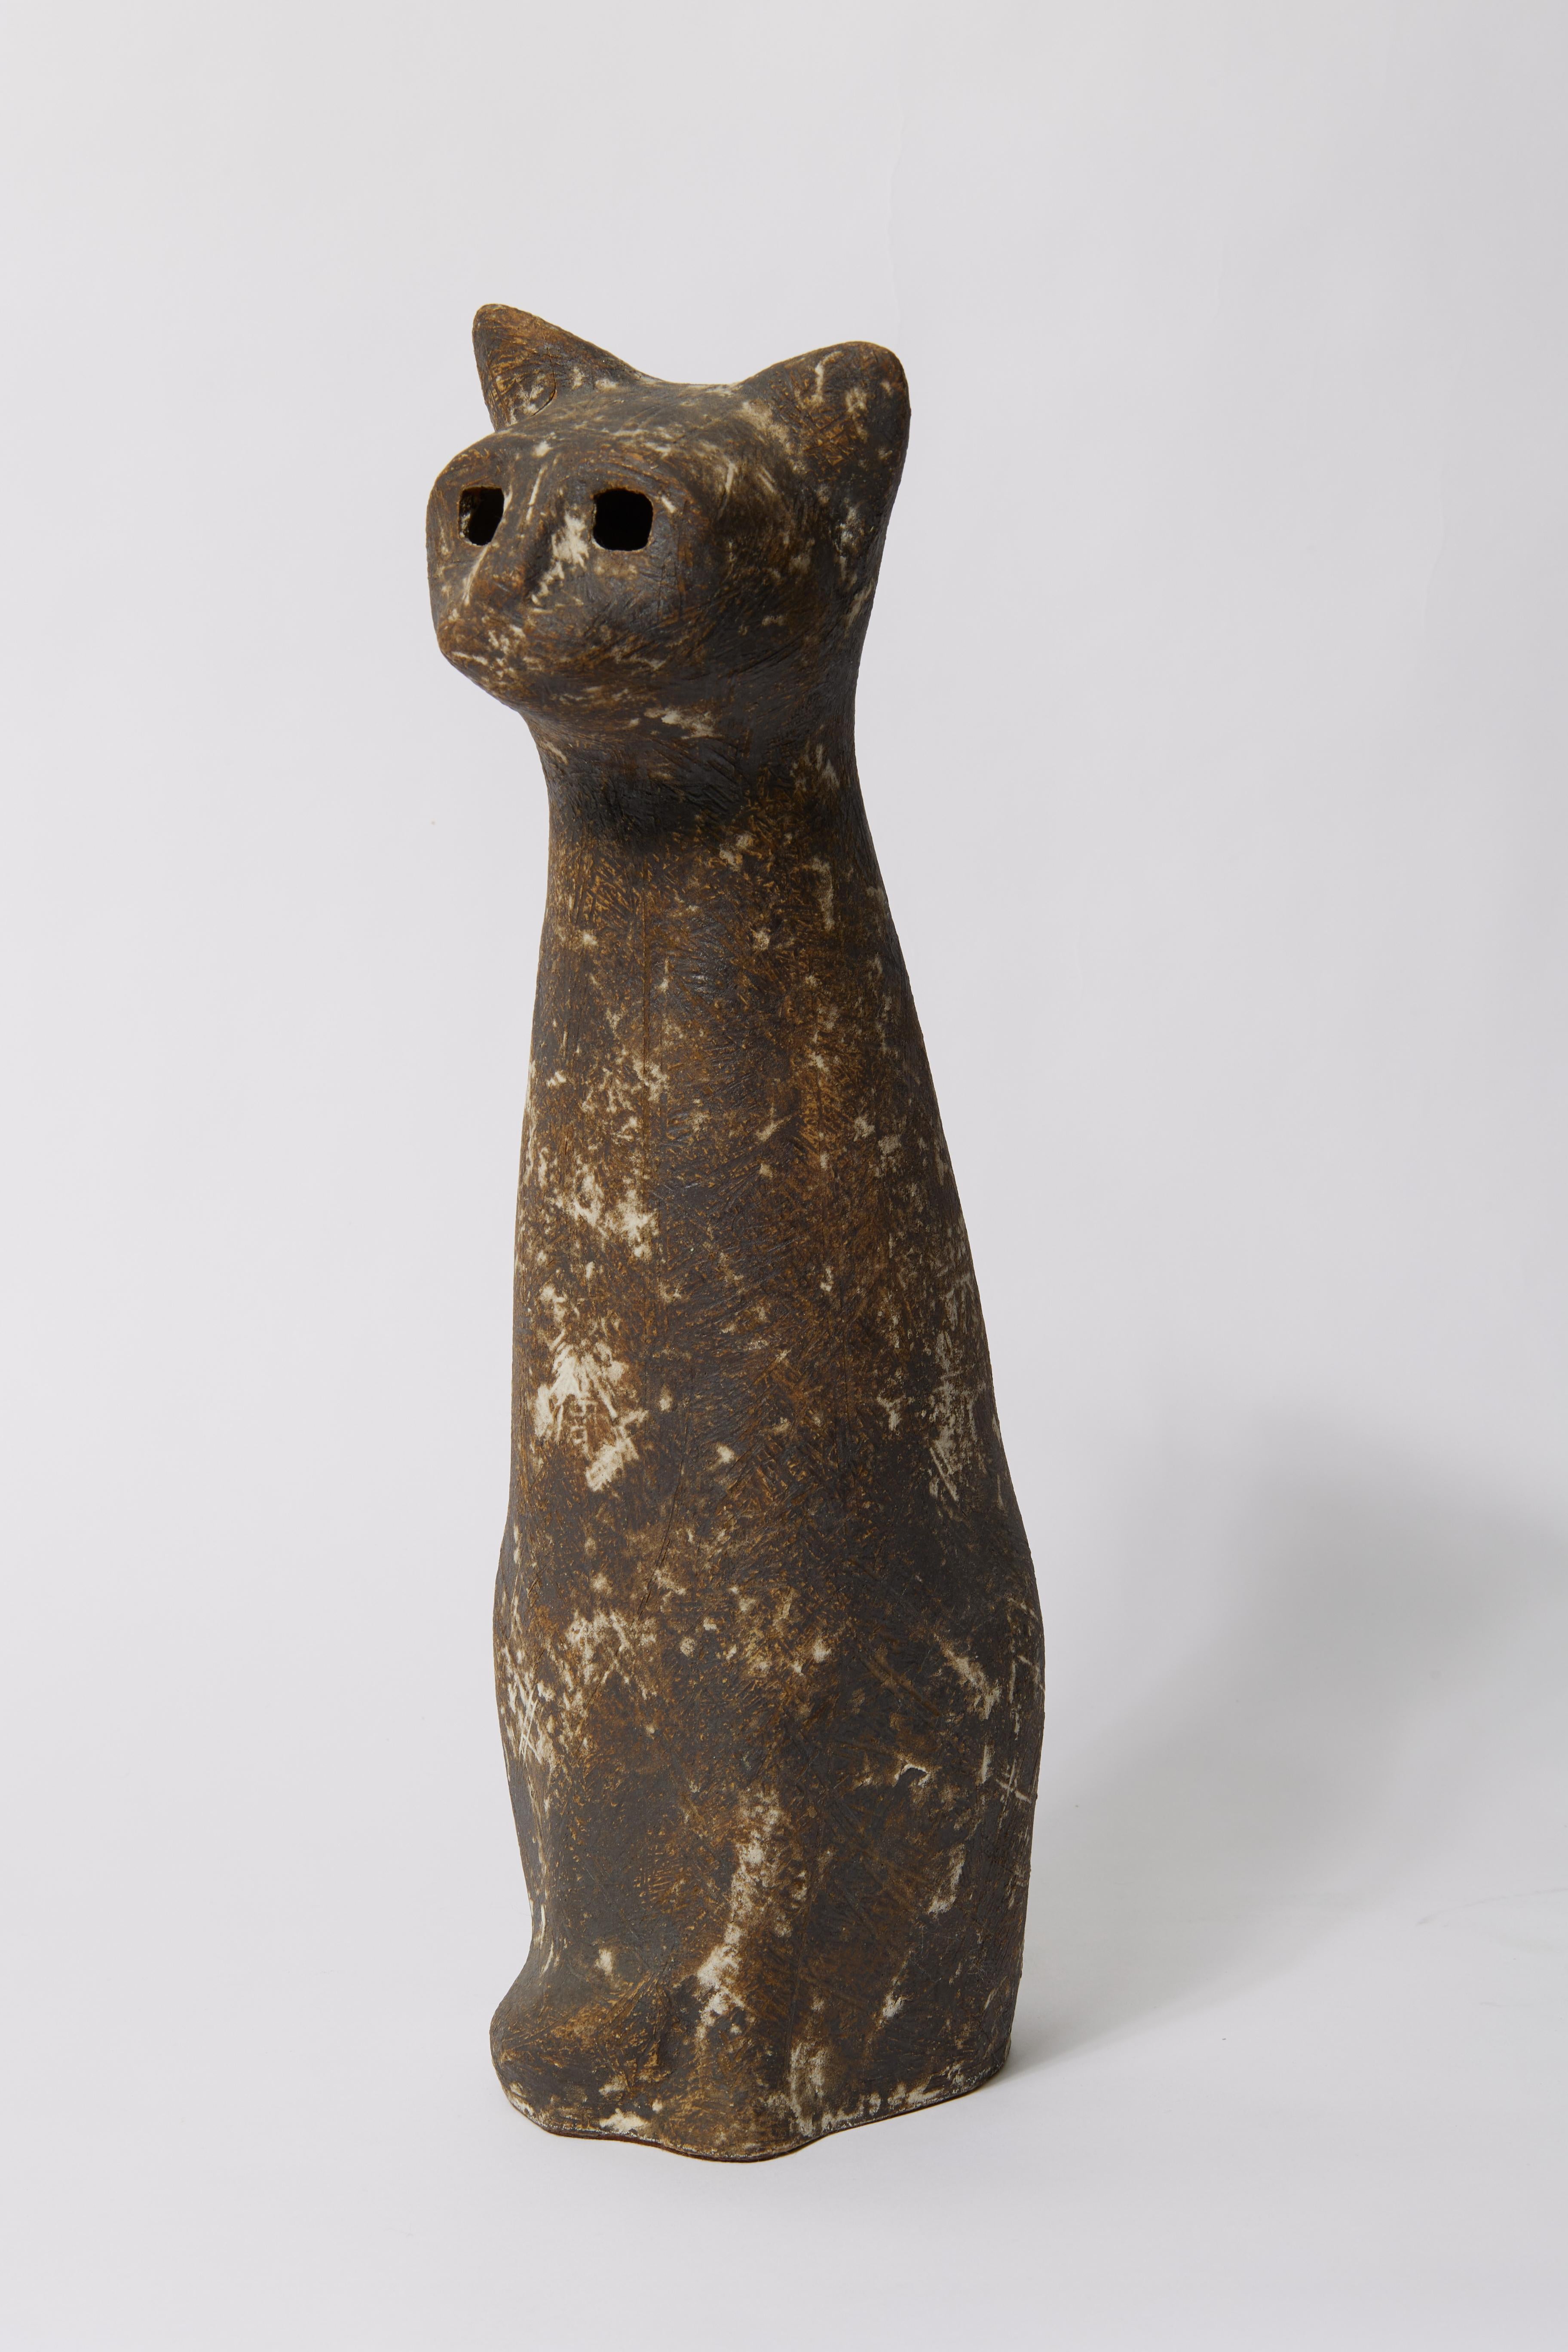 Claude Conover (American, 1907-1994)
Cat, c. 1970
Glazed stoneware
Signed to underside
14.5 x 4.5 x 6.75 inches

Claude Conover worked for 30 years as a commercial designer before turning to ceramics.  By the 1960s he was devoting himself full time